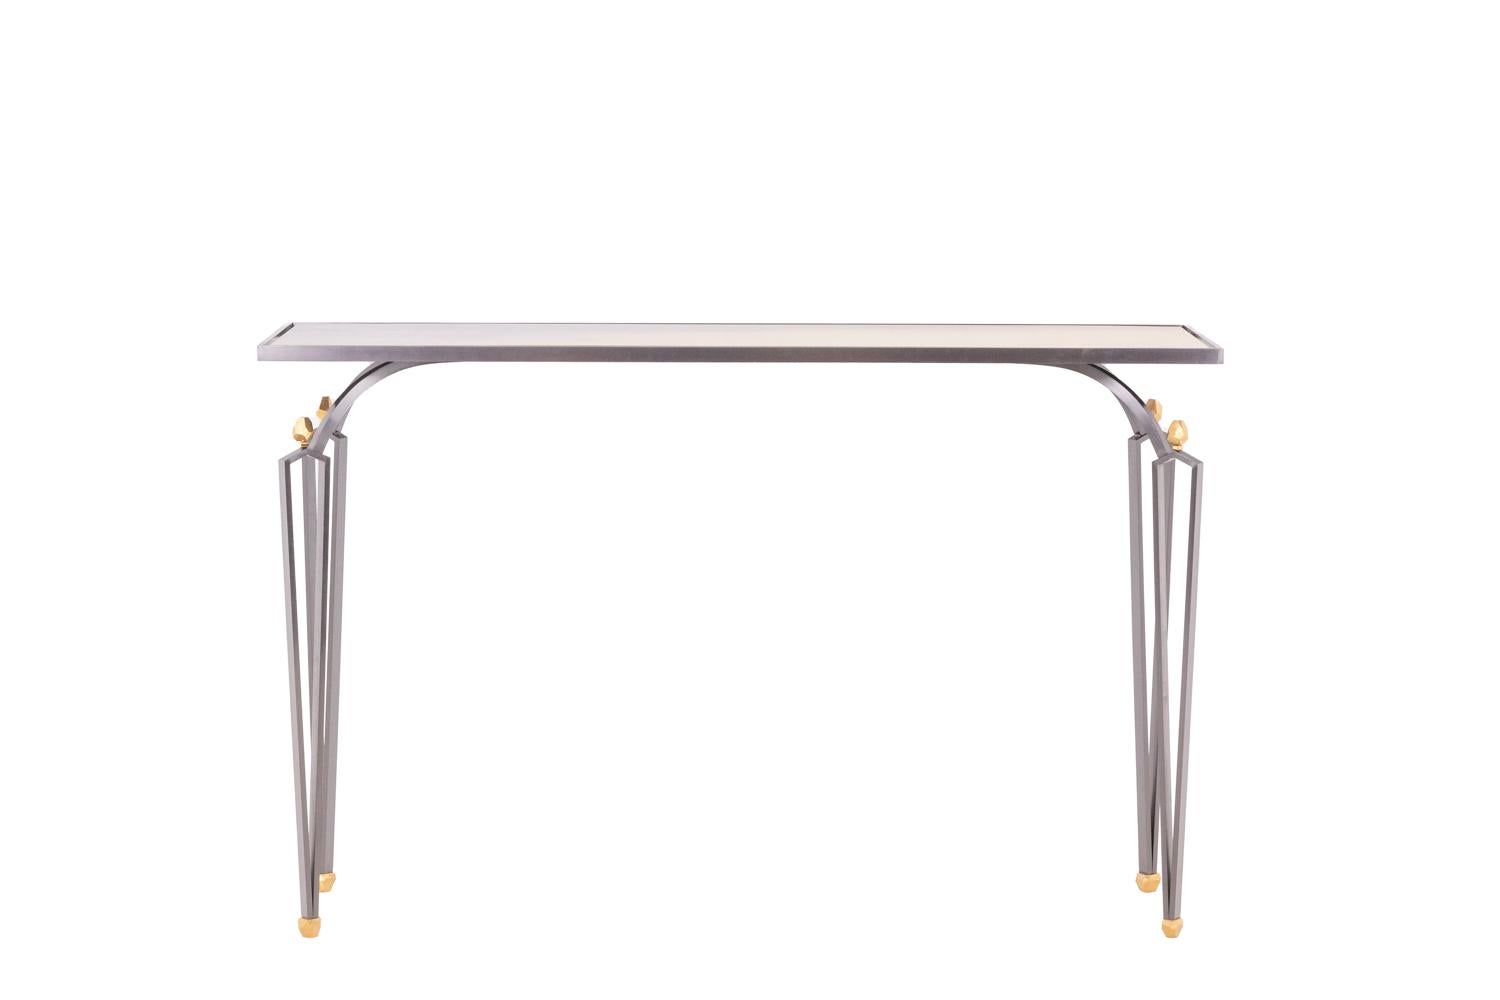 Antoine Dariule, signed. 

Rectangular console. Steel base with golden finishes at the ends and patinated brass top.

Contemporary work of art craftsmanship.